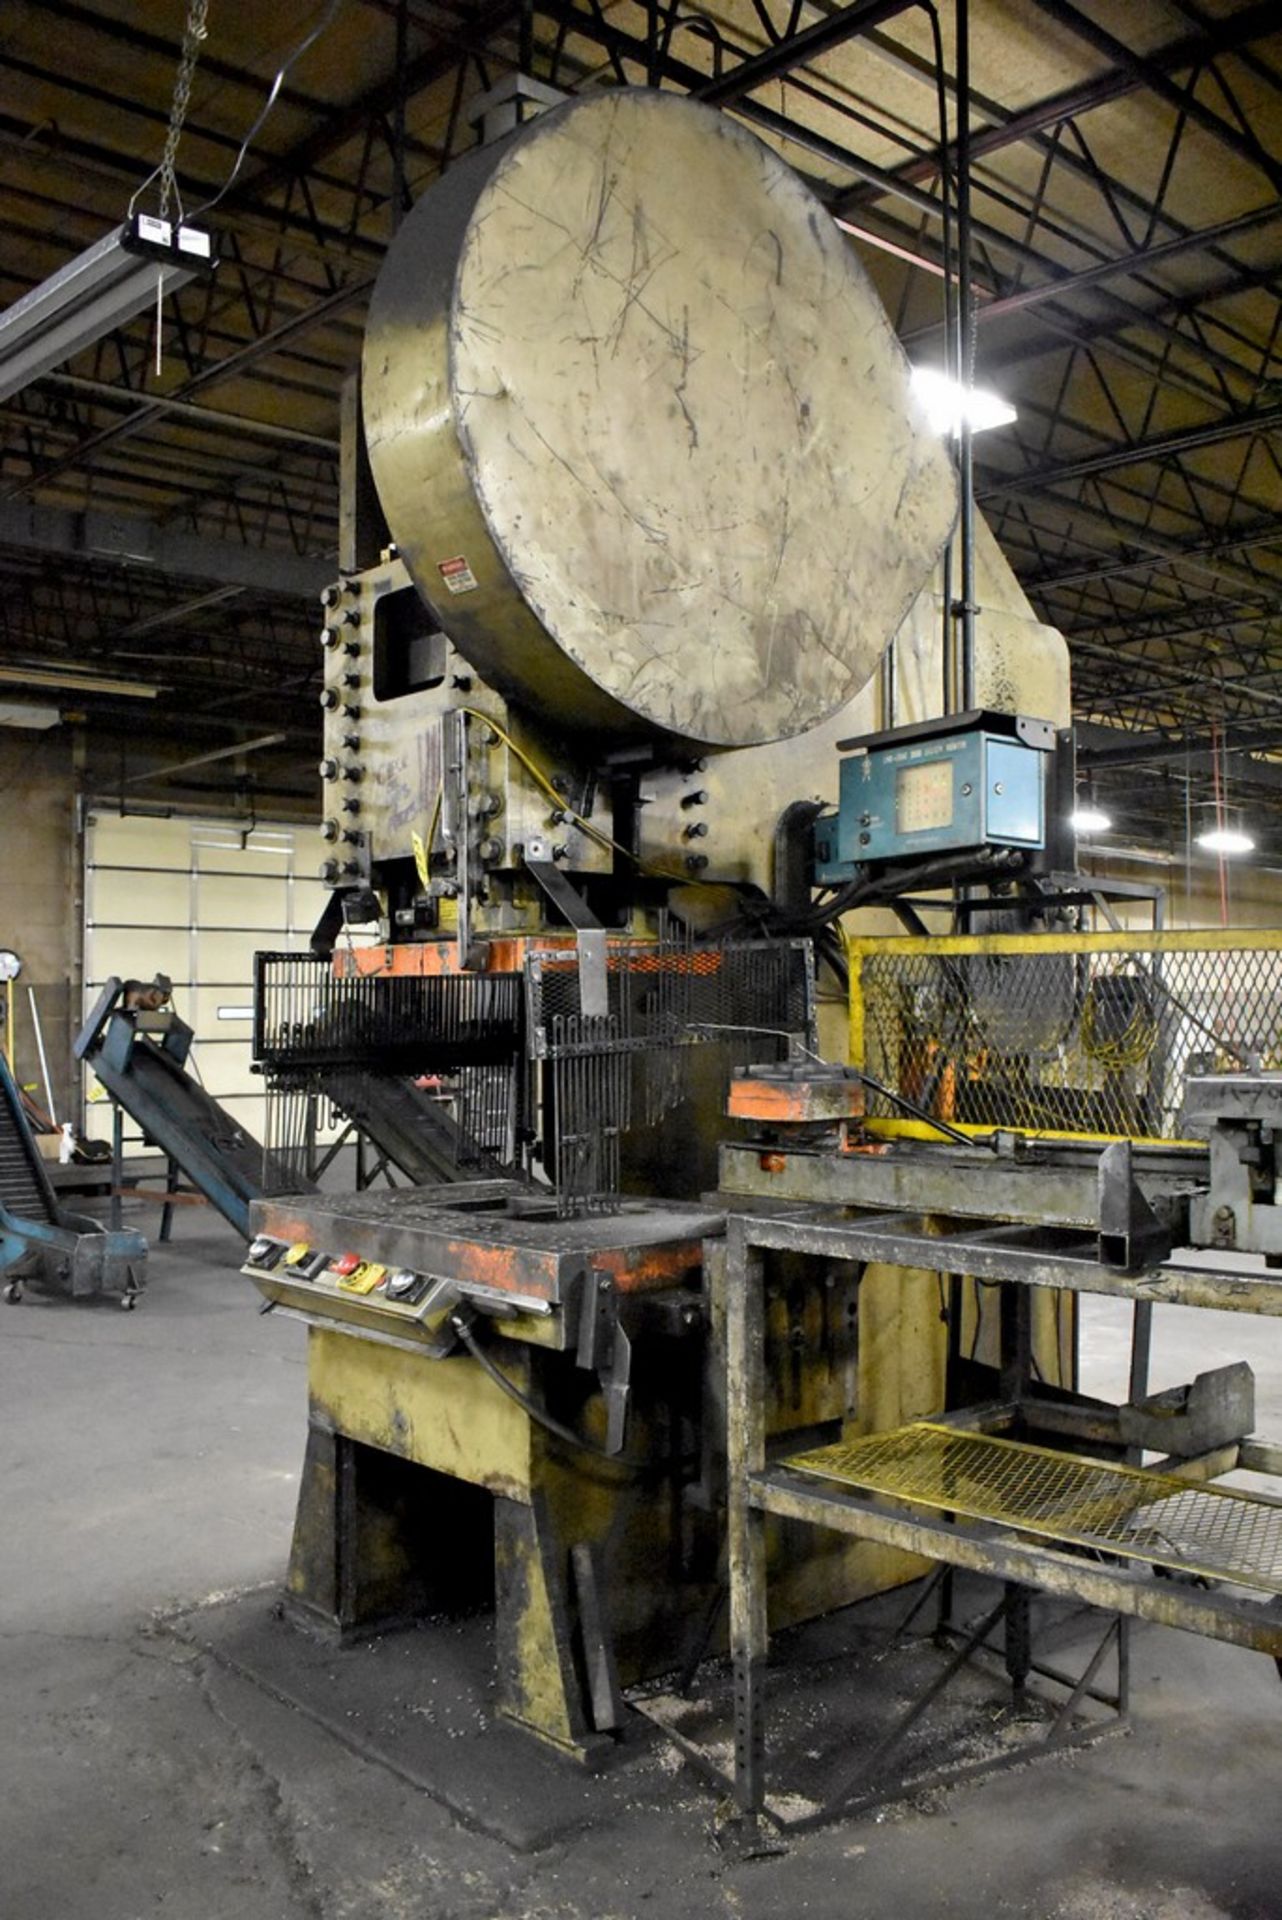 Rousselle Model G1-200 Back Geared Gap Frame Punch Press, 200 Ton - 8" Stroke - 32" x 50" Bed Area - - Image 3 of 11